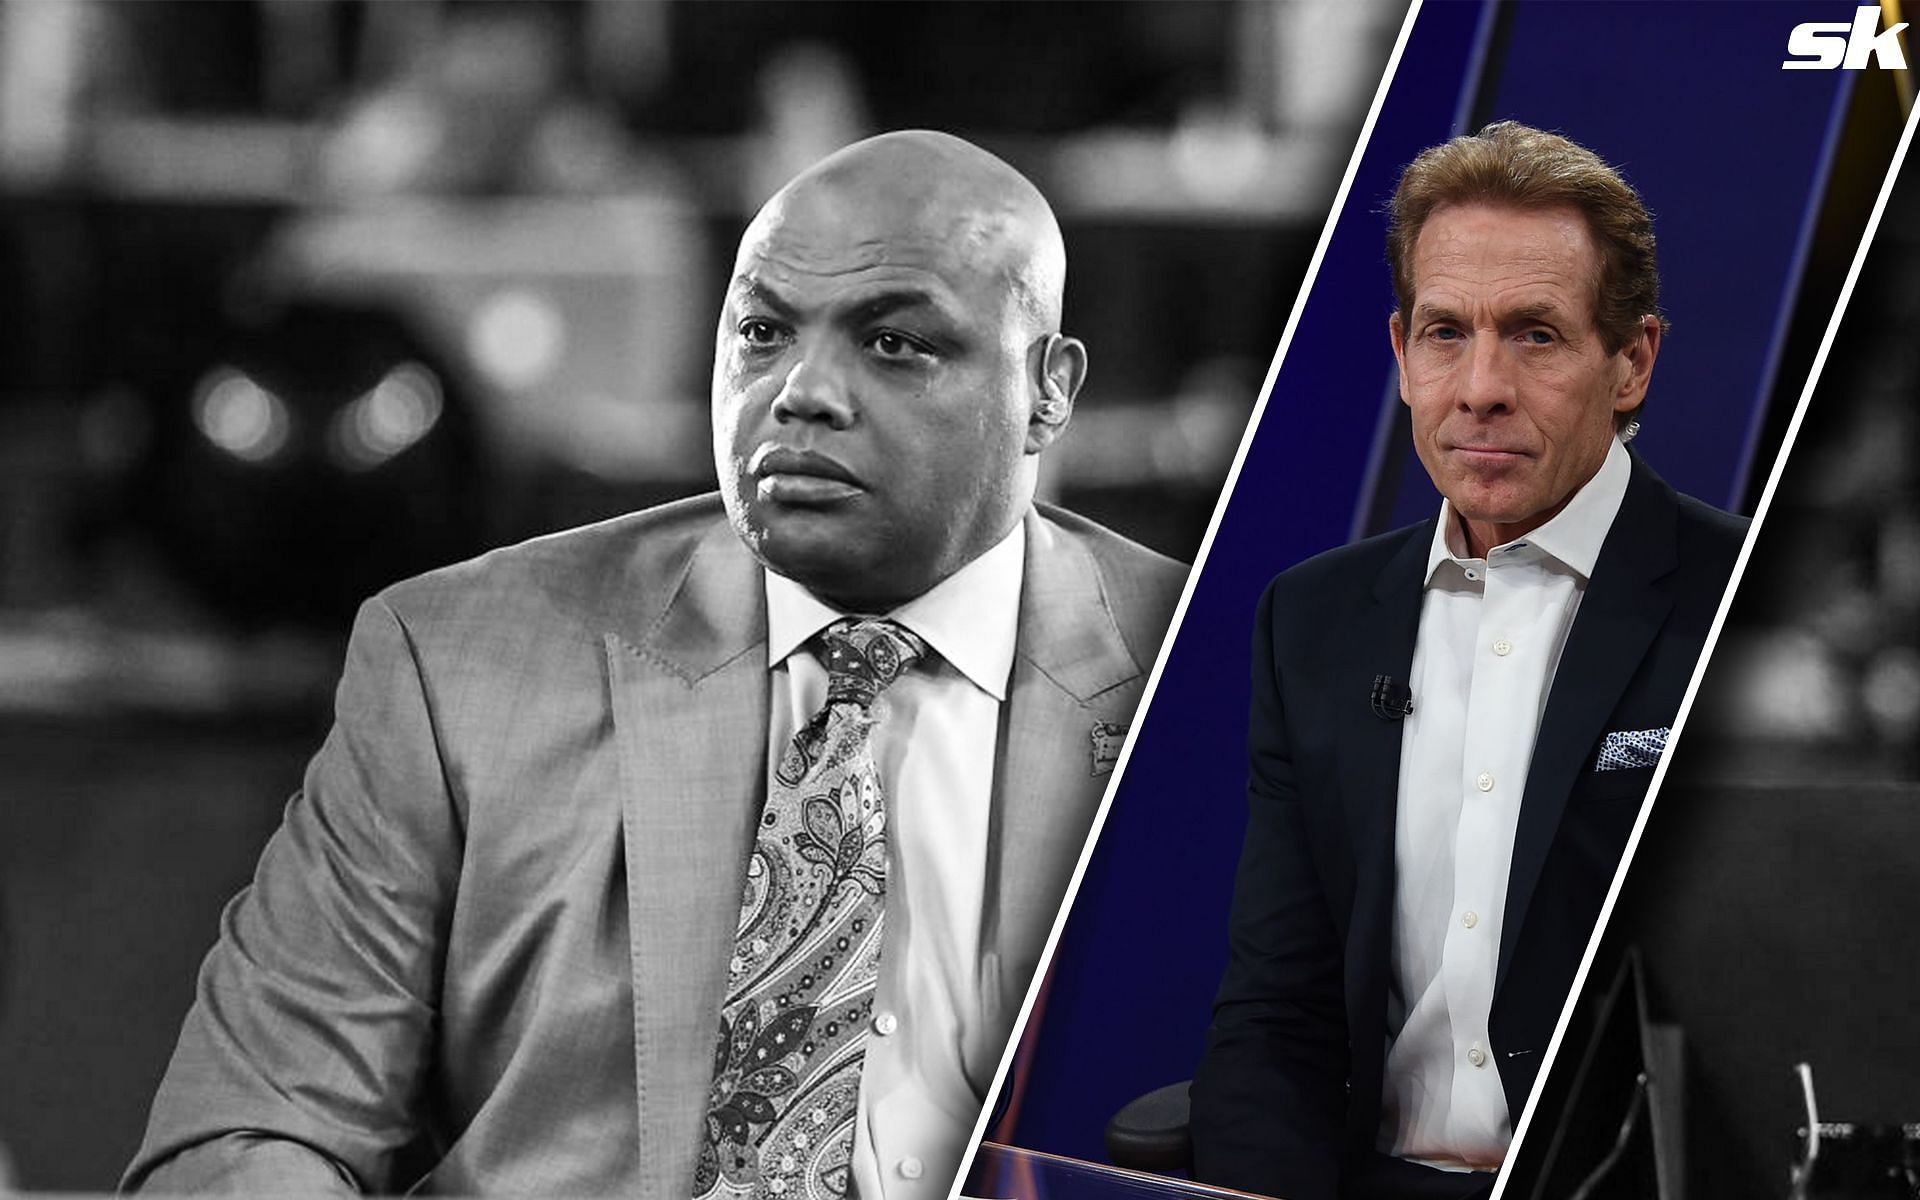 Charles Barkley and Skip Bayless have been at odds for decades